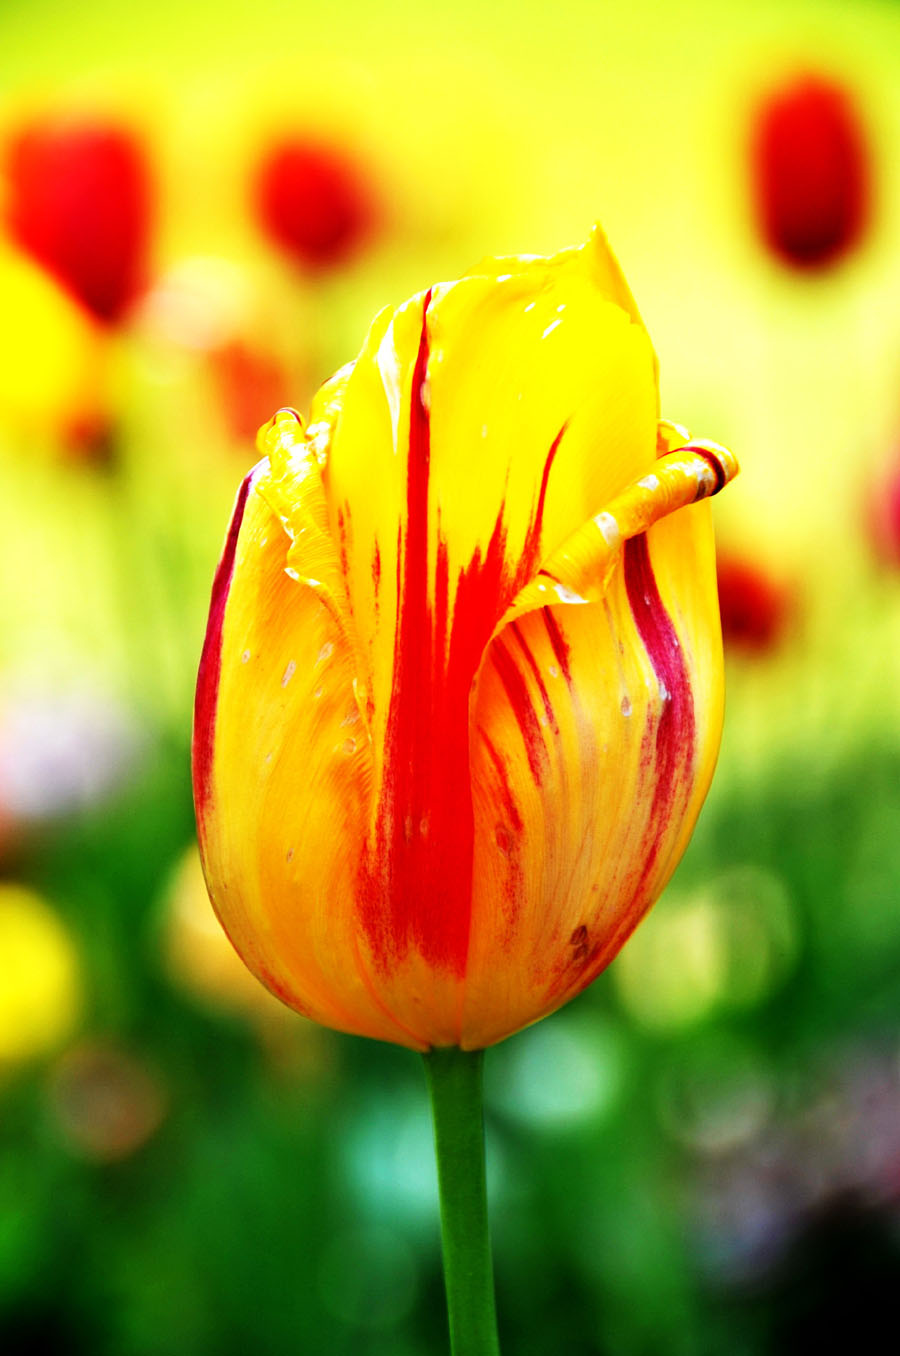 The photo taken on April 10 in Wuhan, Hubei Province shows a tulip grows large brightly-colored cup-shaped flower.[Xiaoyong/China.org.cn]